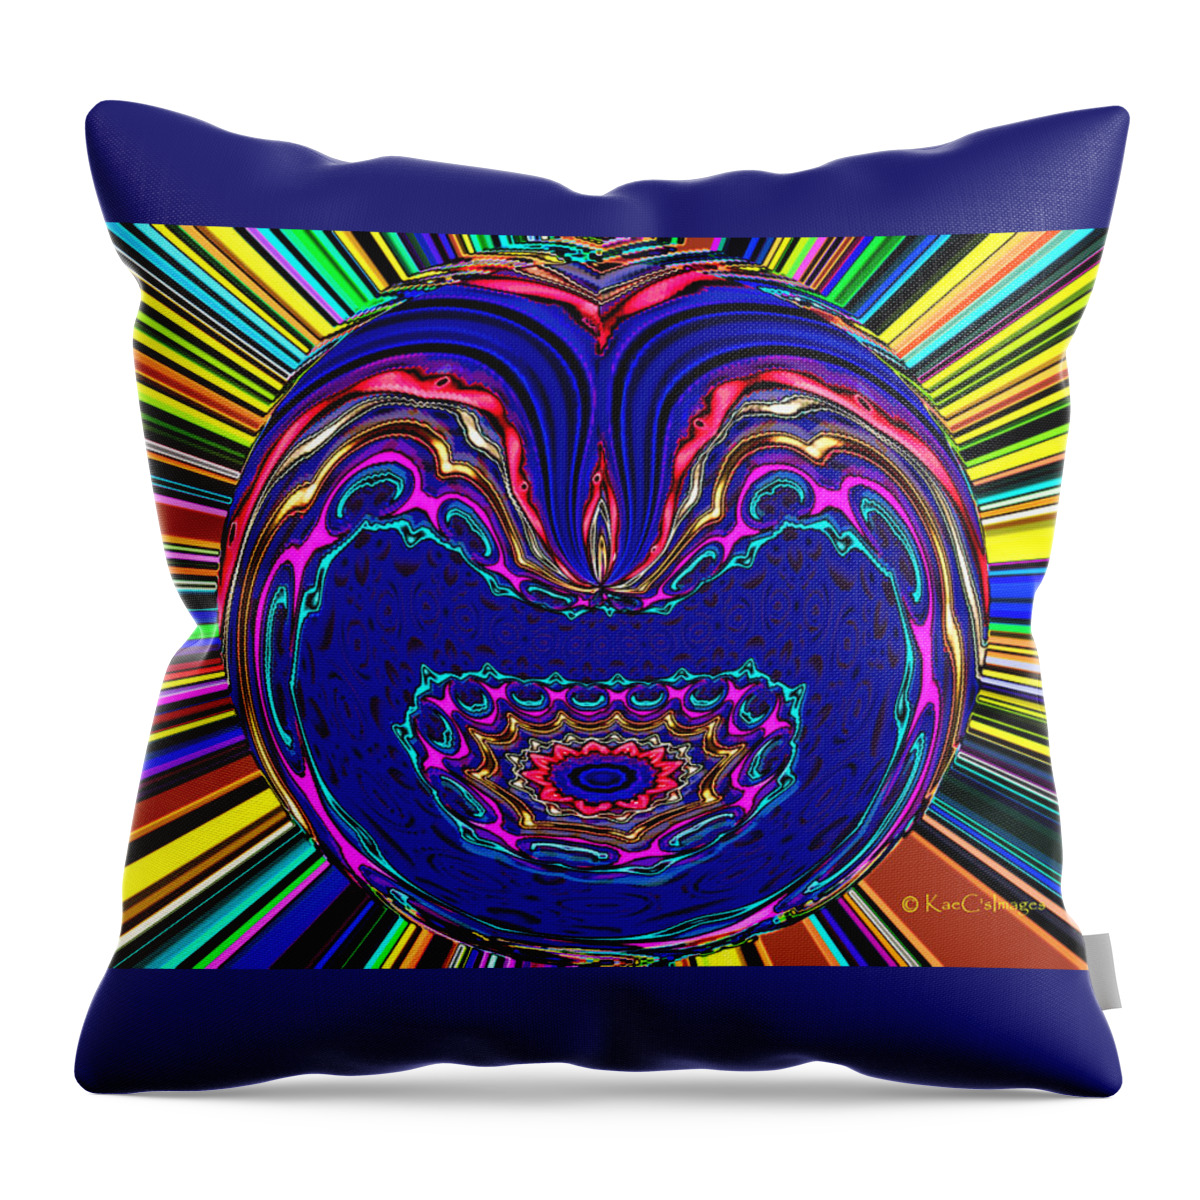 Sunburst Throw Pillow featuring the digital art What do You See? by Kae Cheatham